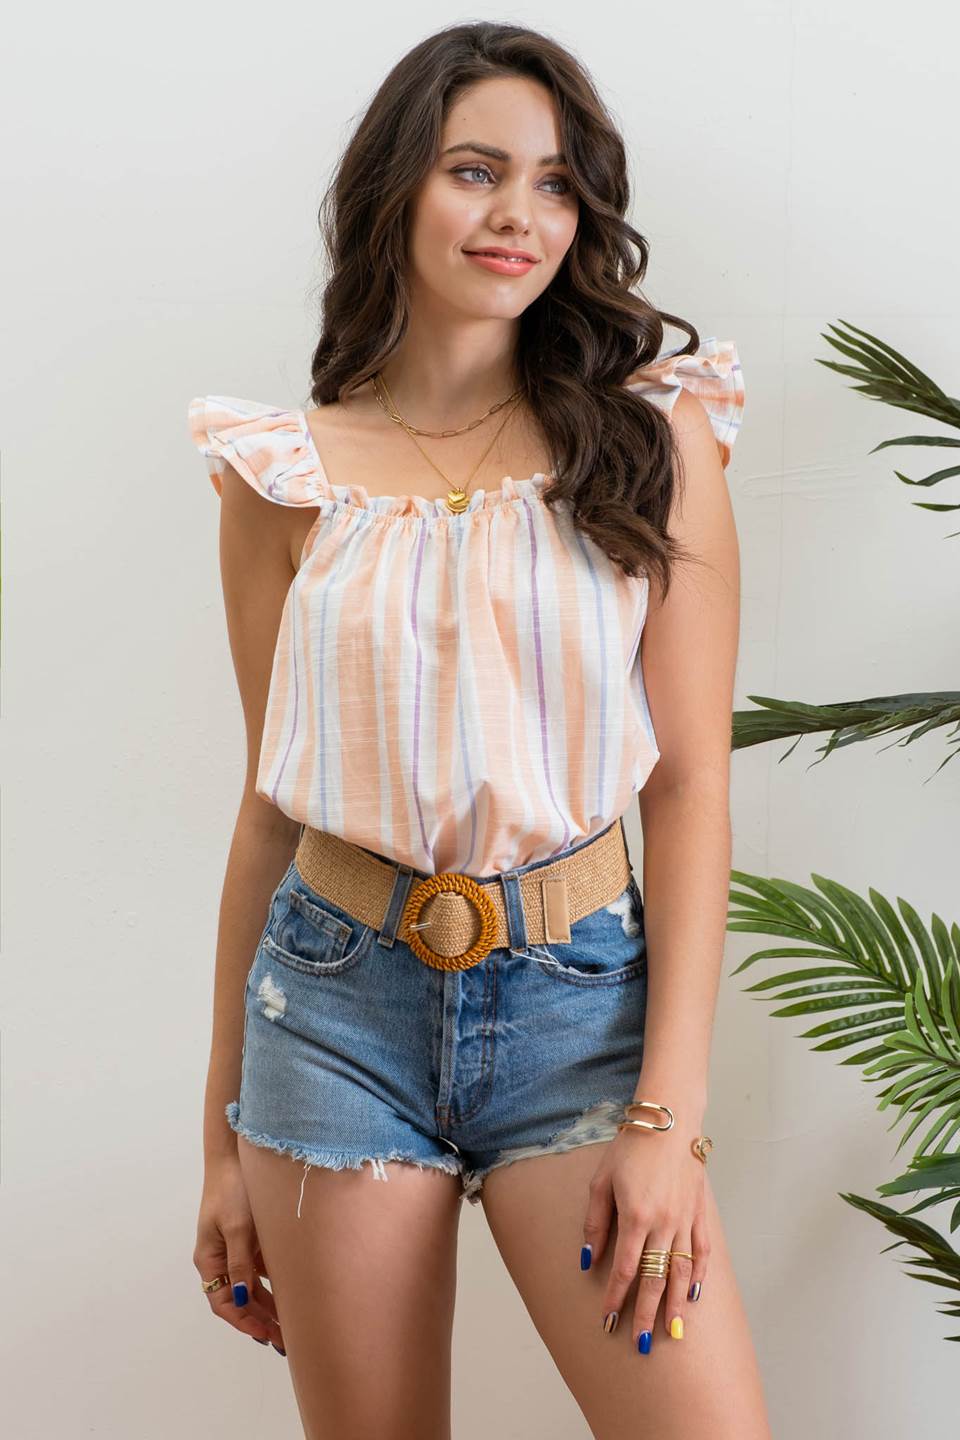 Vertically Striped Top